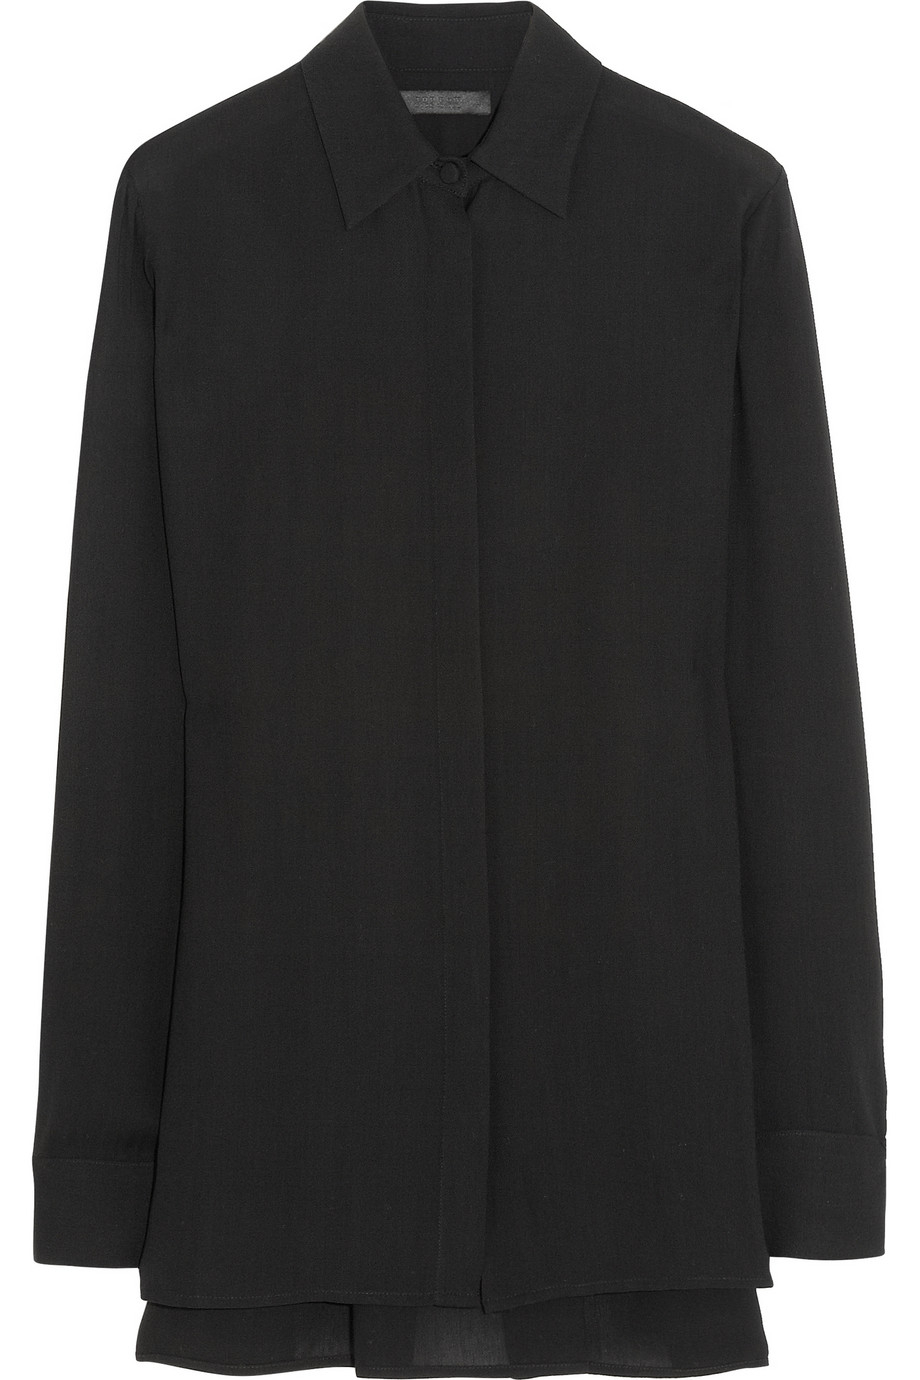 Lyst - The Row Carlton Oversized Crepe Blouse in Black